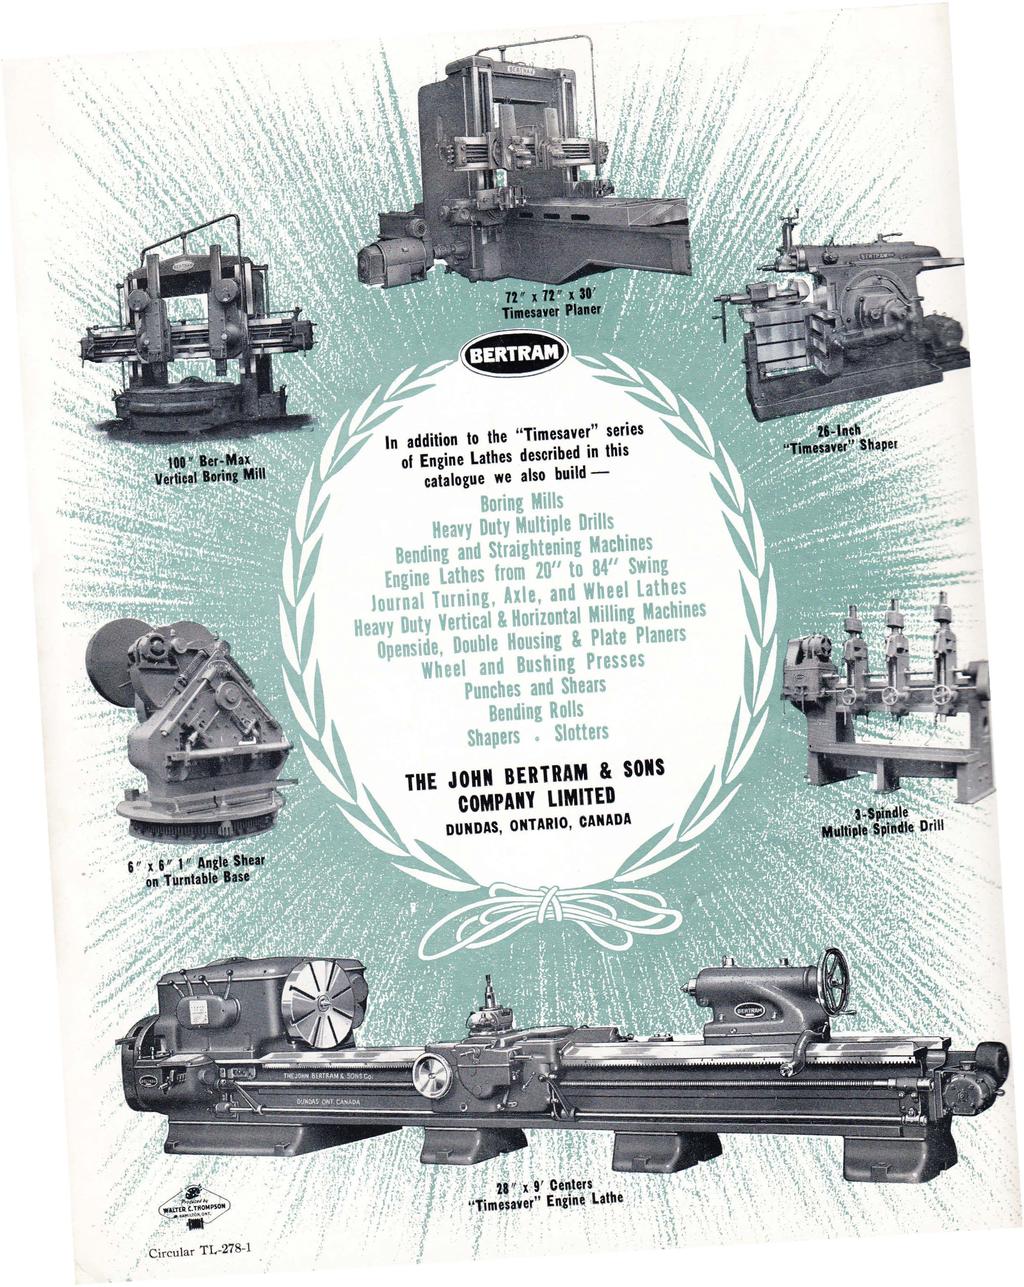 .: ~ In addition to the "Timesaver" series of Engine Lathes described in this catalogue we also build- Boring Mills Heavy Duty Multiple Drills Bending and Straightening Machines Engine lathes from